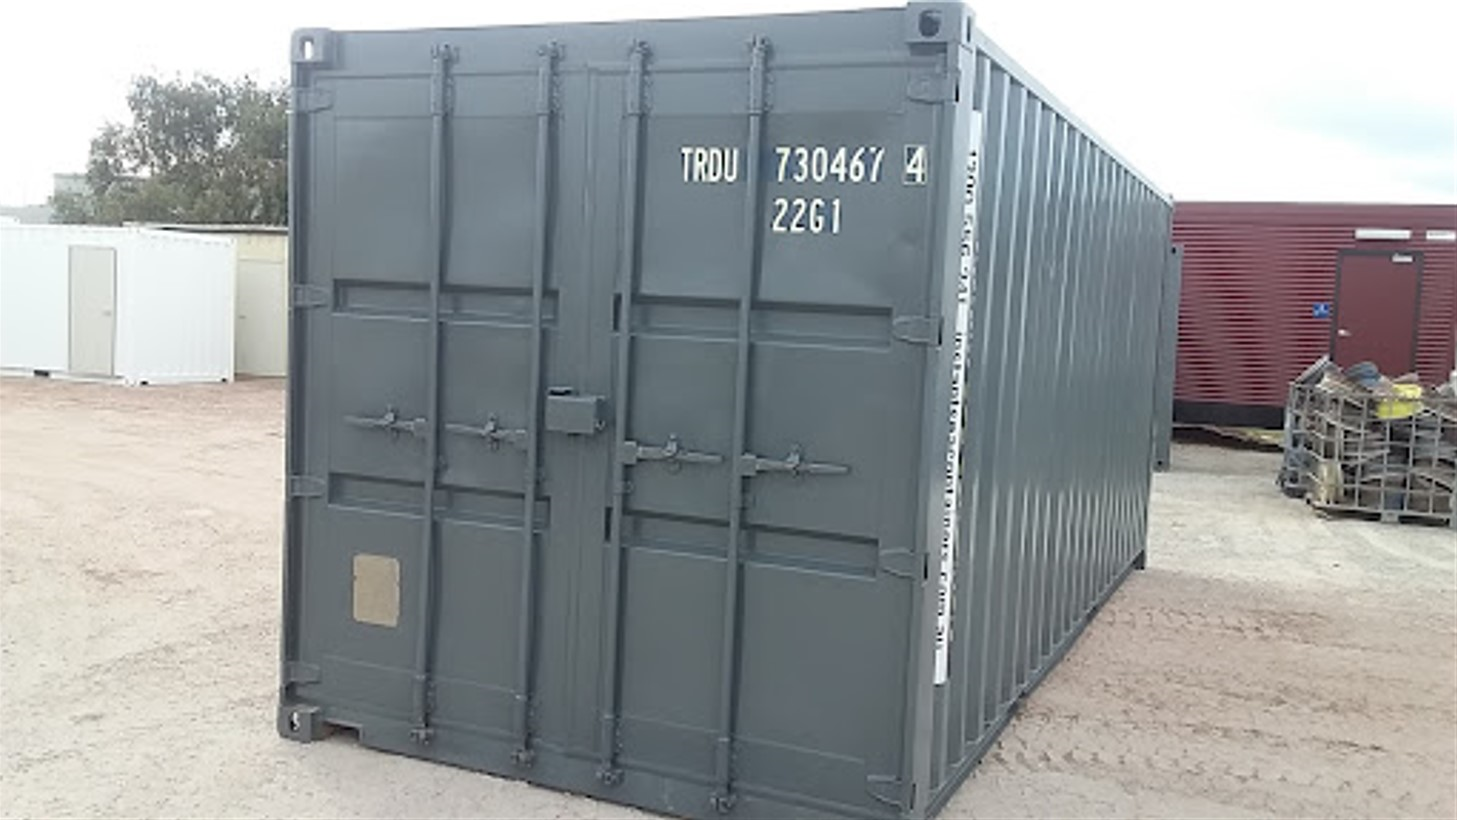 Gray shipping container with double doors closed, situated in a storage yard with other containers in the background.